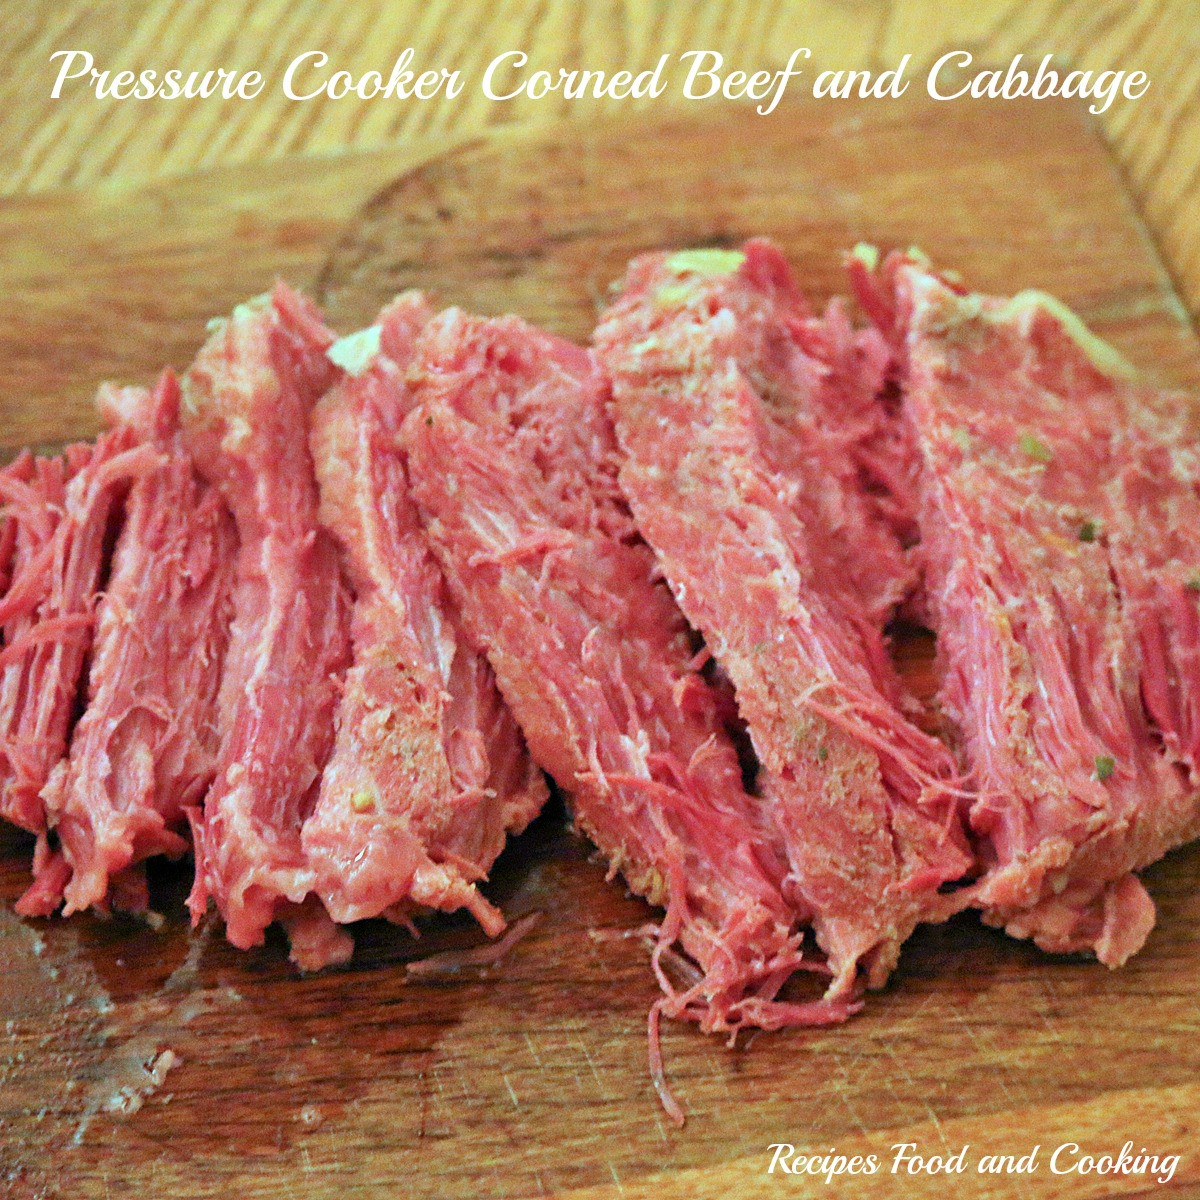 Pressure Cook Corned Beef And Cabbage
 Pressure Cooker Corned Beef with Cabbage Carrots and Potatoes